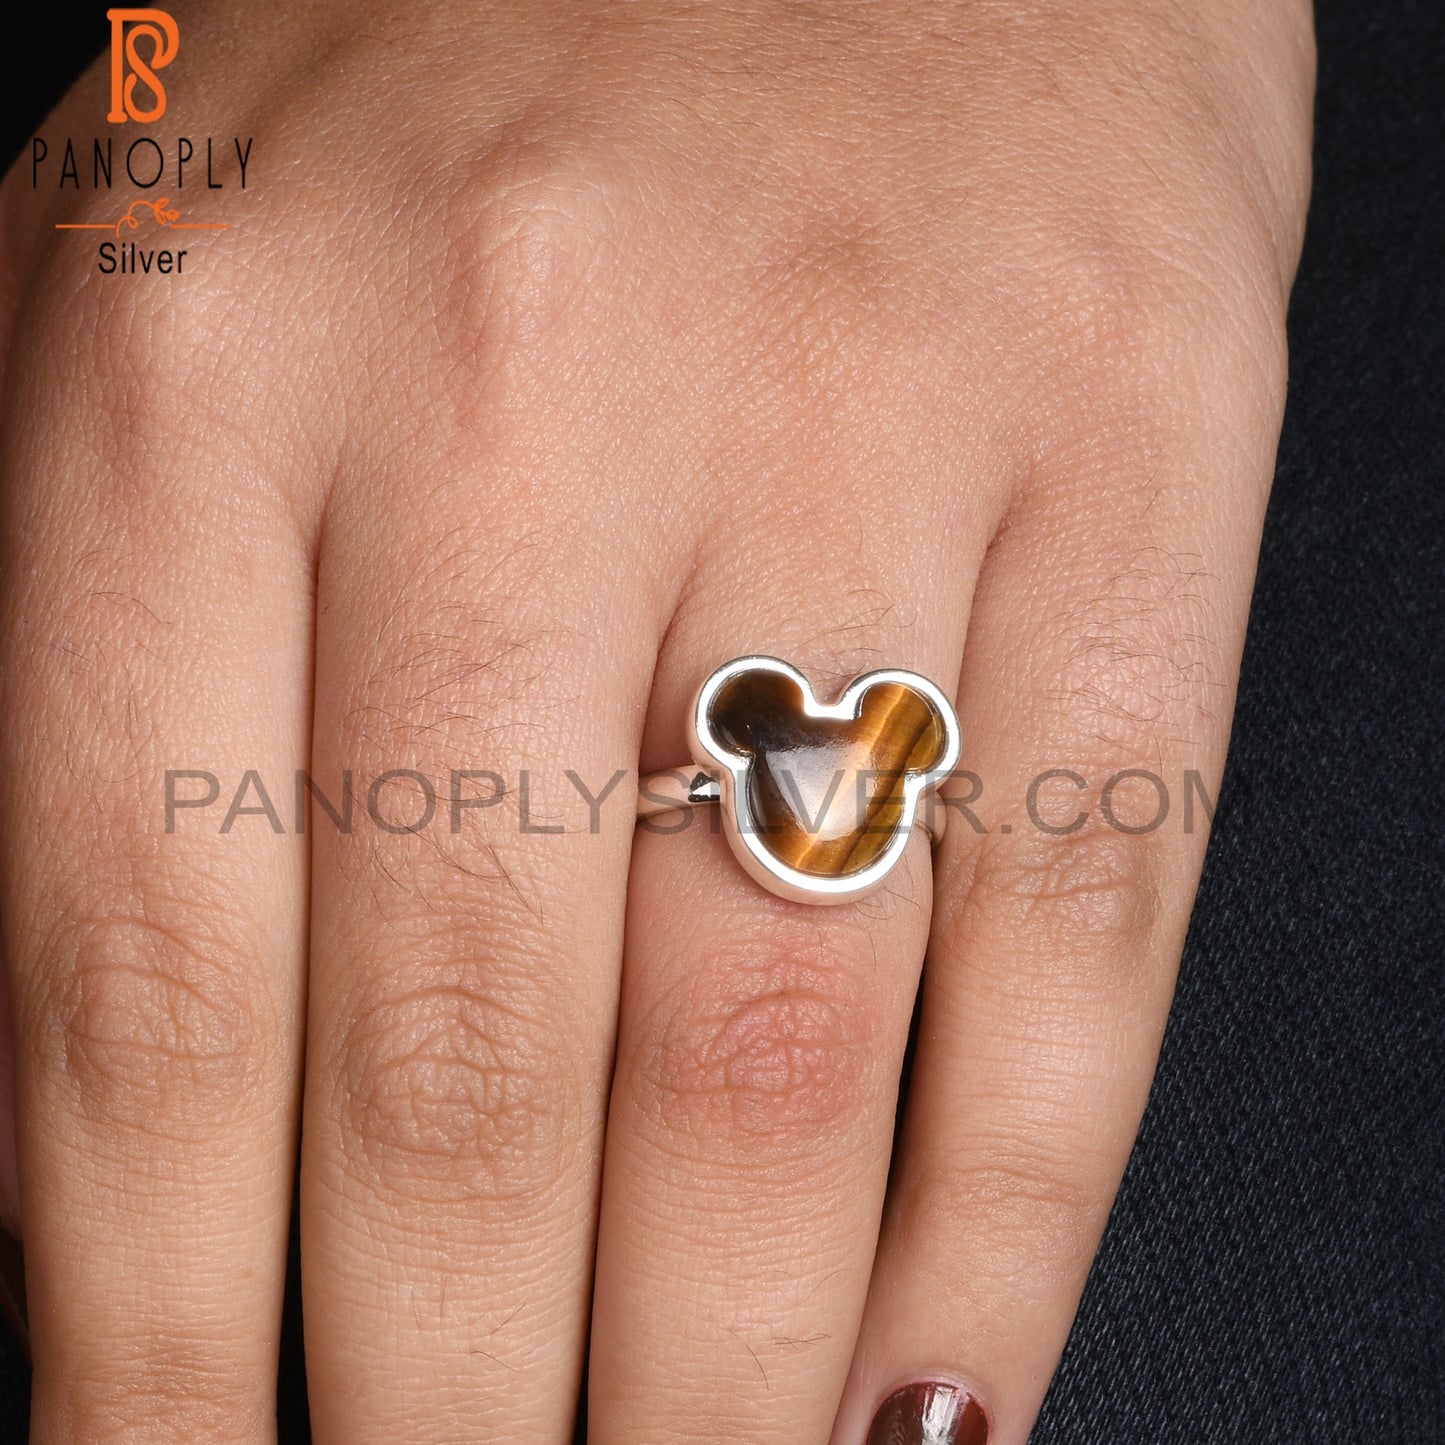 Tiger Eye Yellow Mickey Mouse 925 Silver Beautiful Cat Ring